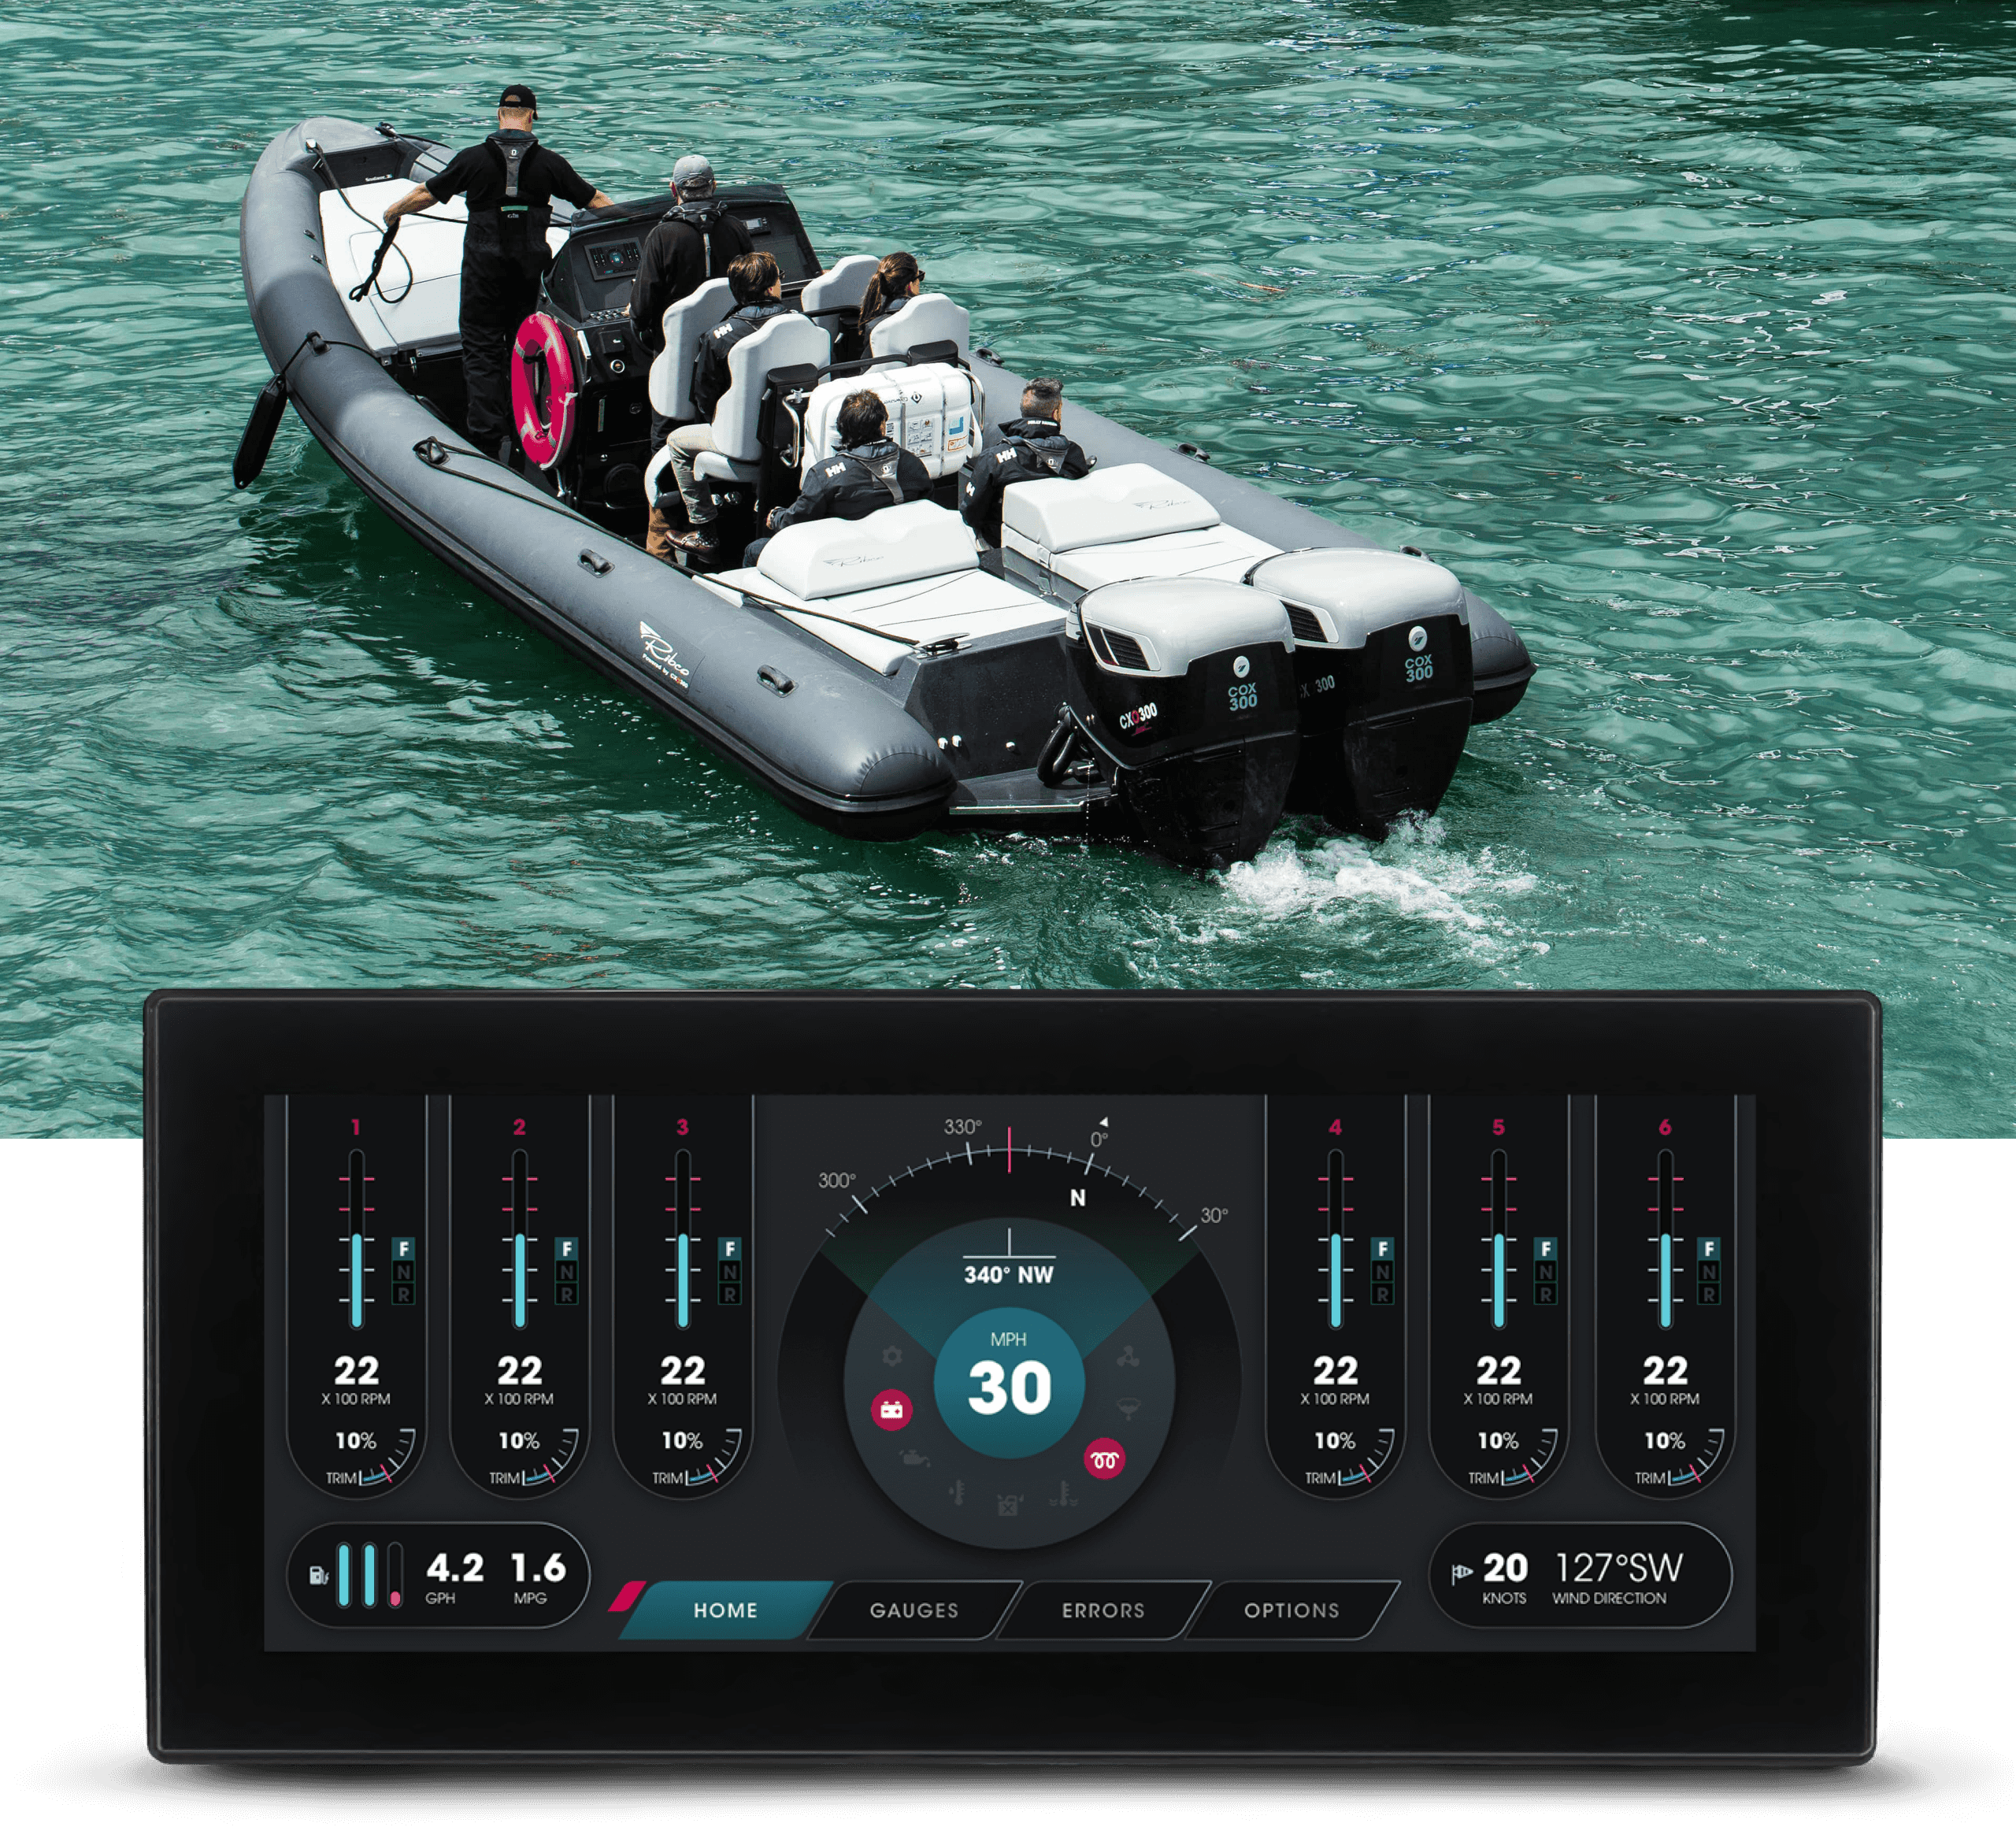 Boat with two outboard engines using digital interface